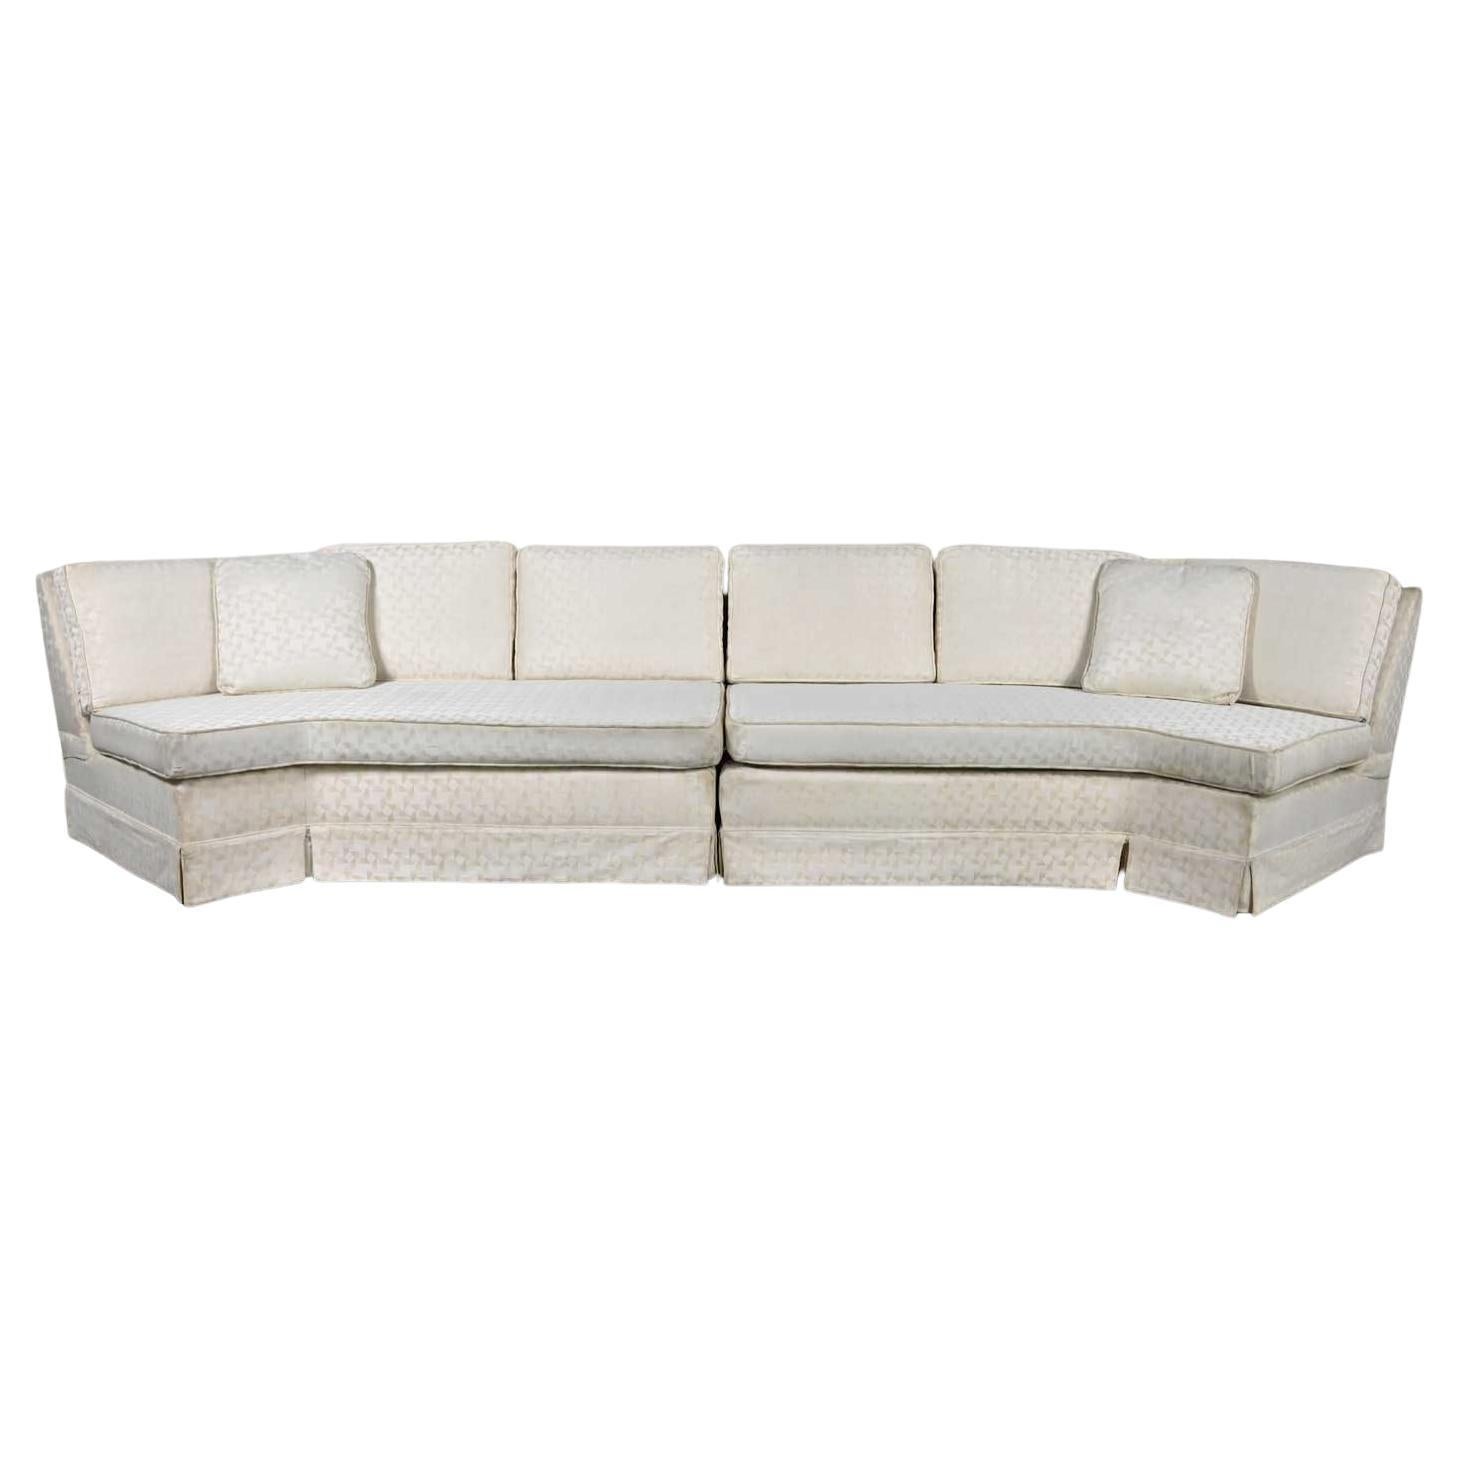 Mid-Century Modern to Modern & Hollywood Regency 2 Piece Angled Sectional Sofa For Sale